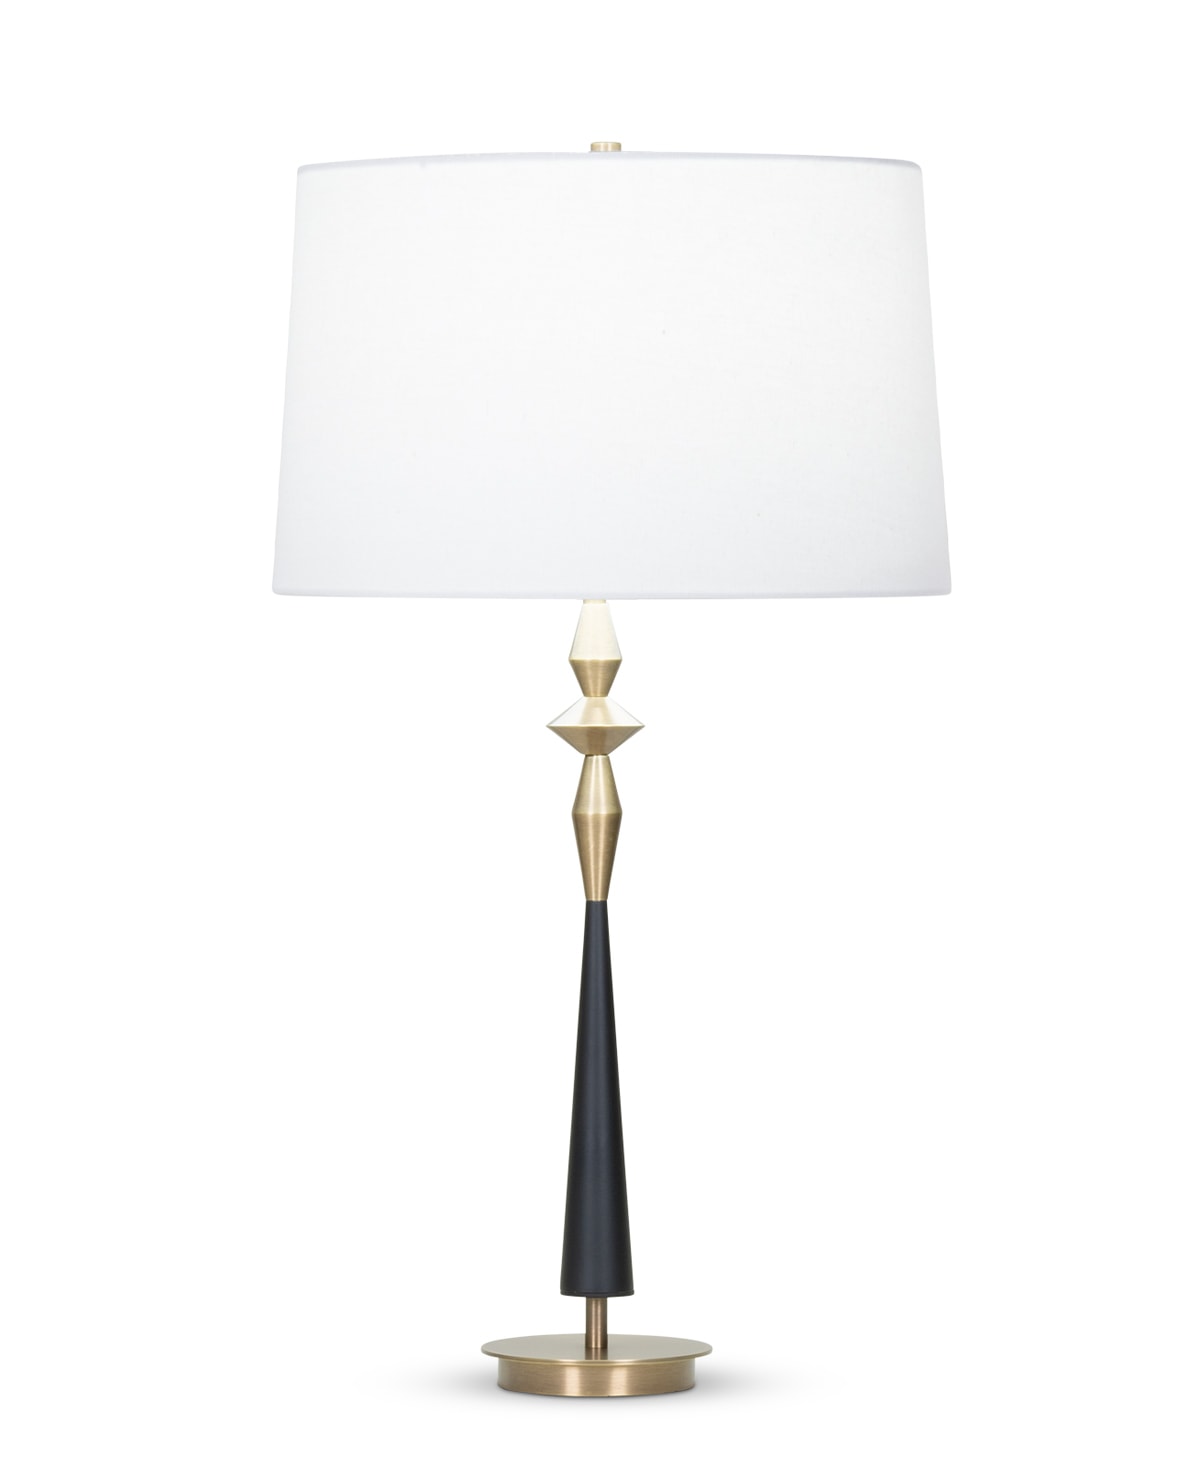 FlowDecor Morrison Table Lamp in metal with antique brass & black matte finishes and off-white cotton tapered drum shade (# 4082)